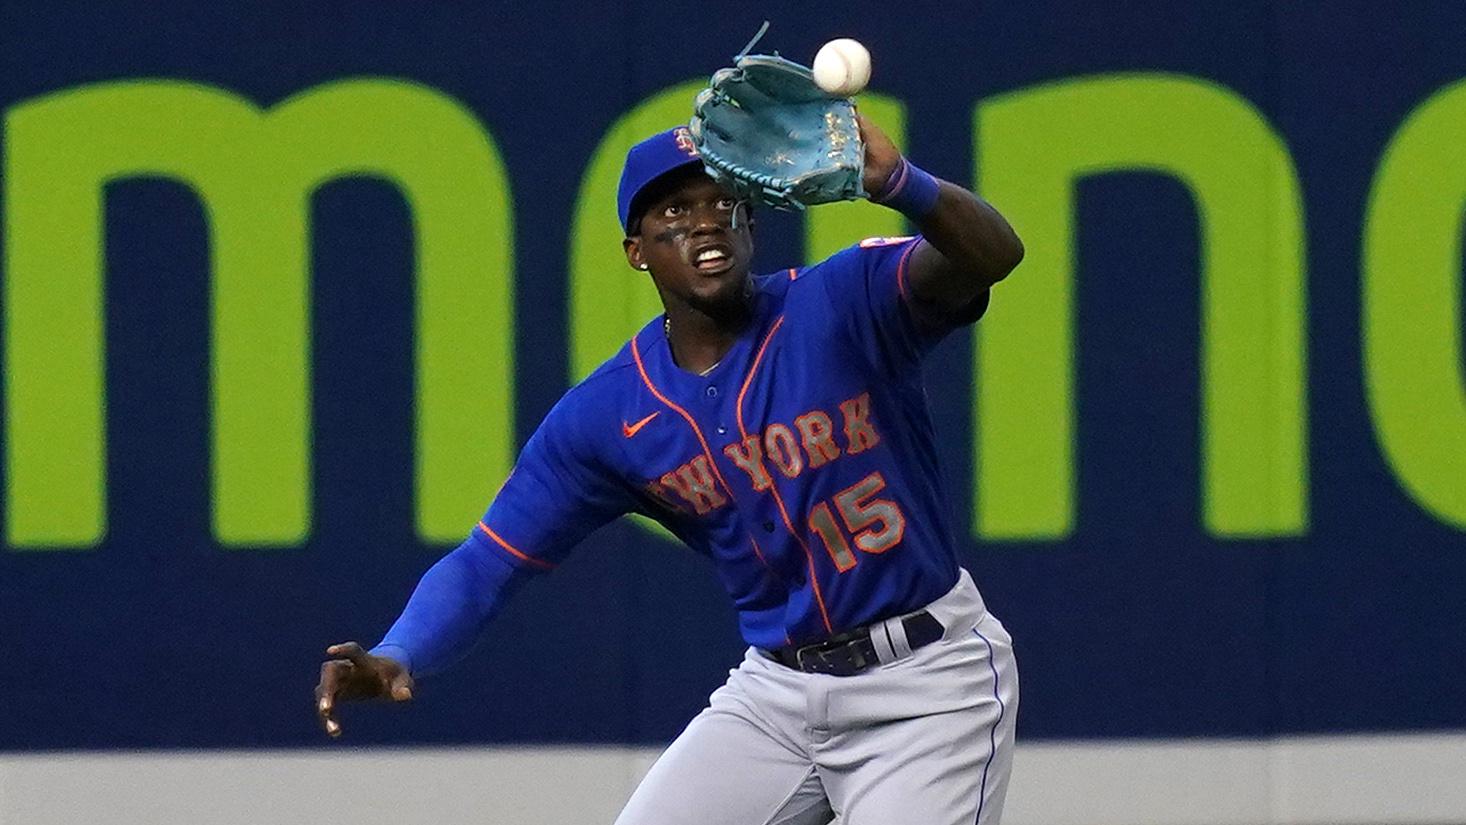 May 23, 2021; Miami, Florida, USA; New York Mets left fielder Cameron Maybin (15) catches the fly ball hit by Miami Marlins first baseman Jesus Aguilar (24, not pictured) in the 1st inning at loanDepot park. / Jasen Vinlove-USA TODAY Sports